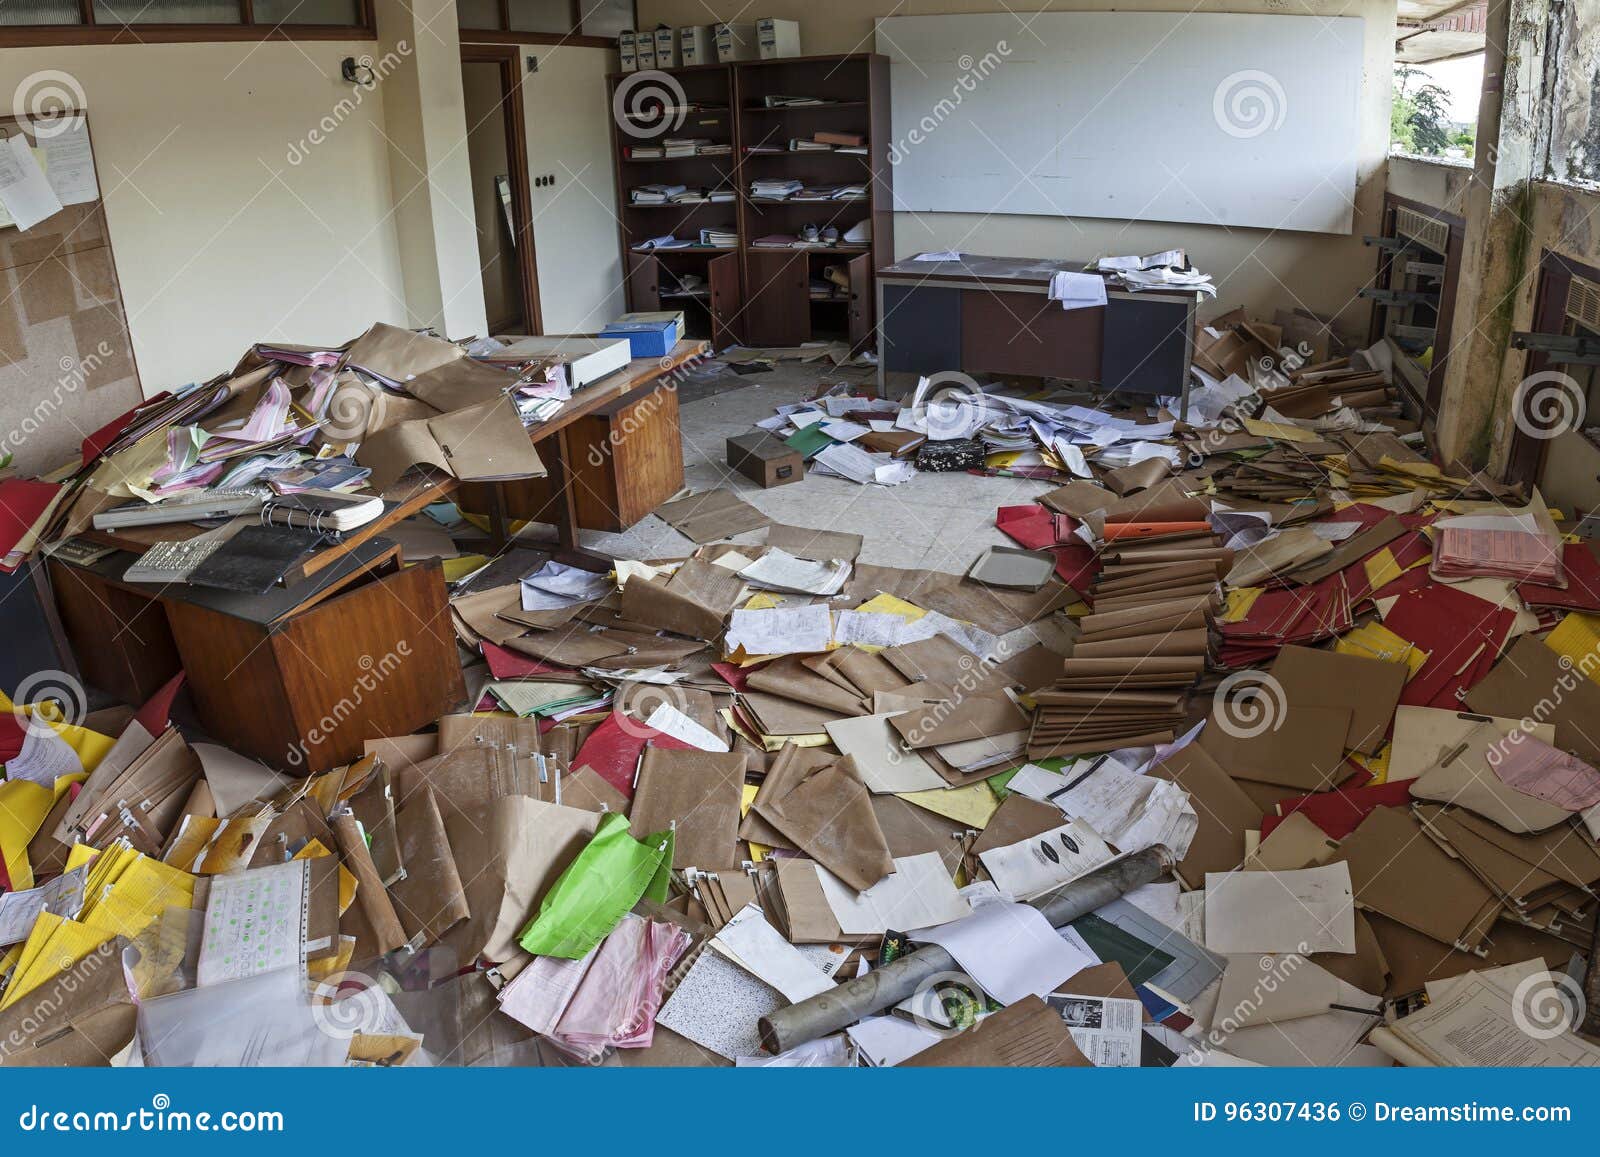 messy office full of folders and papers